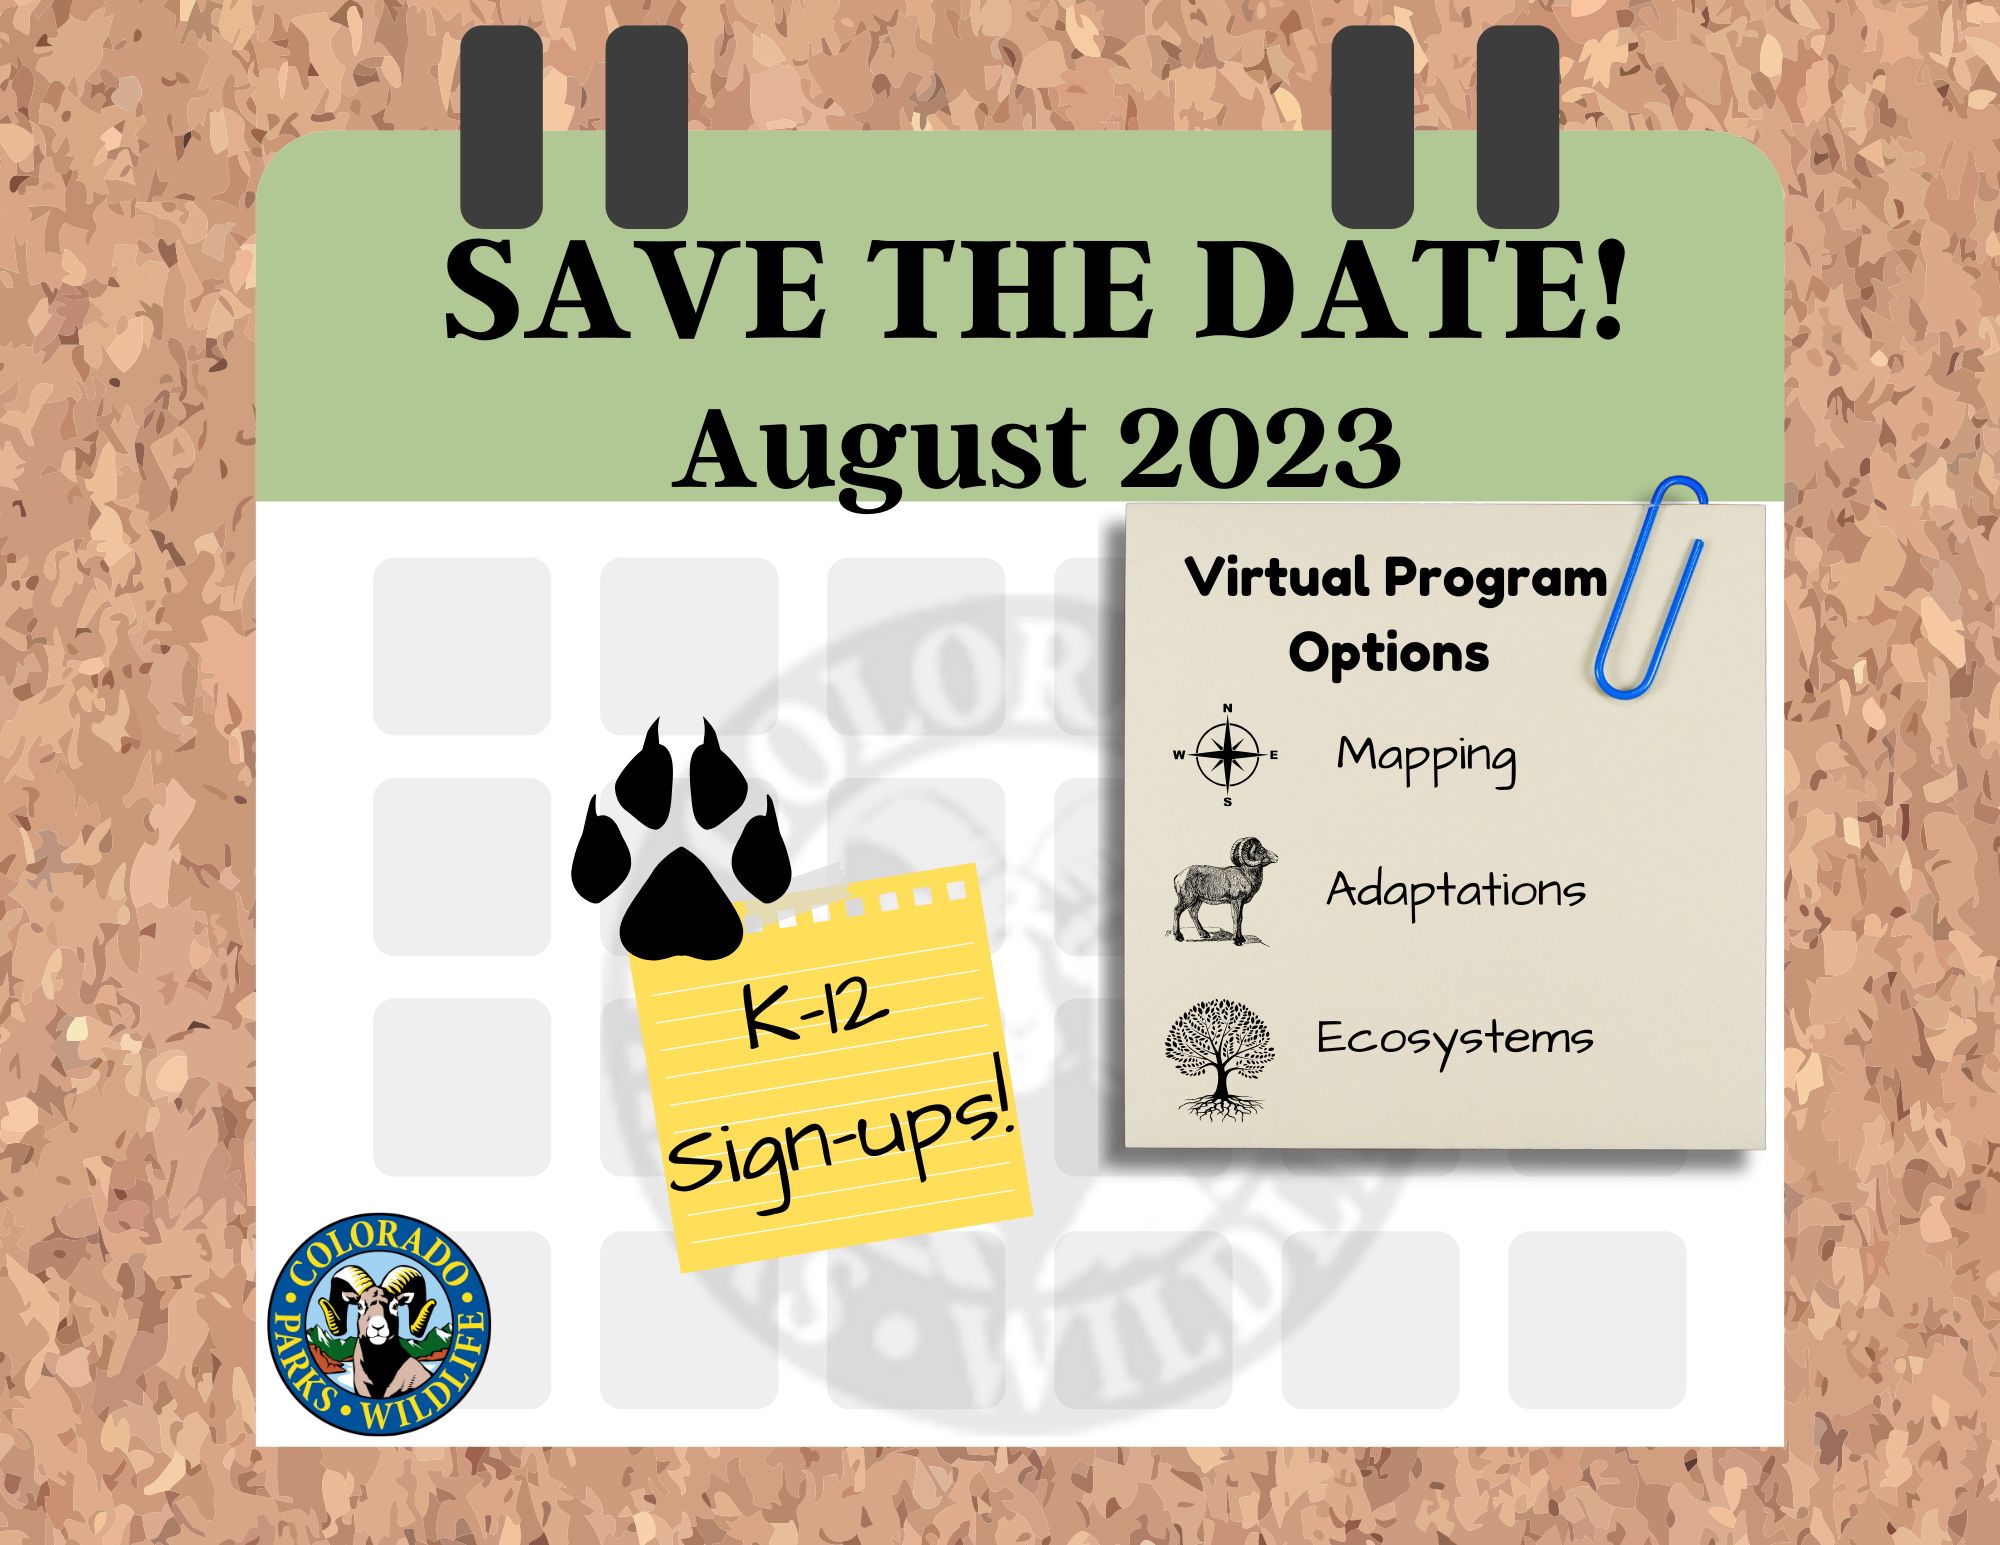 simple calendar image with a sticky note to save the date for k-12sign-ups for virtual programs